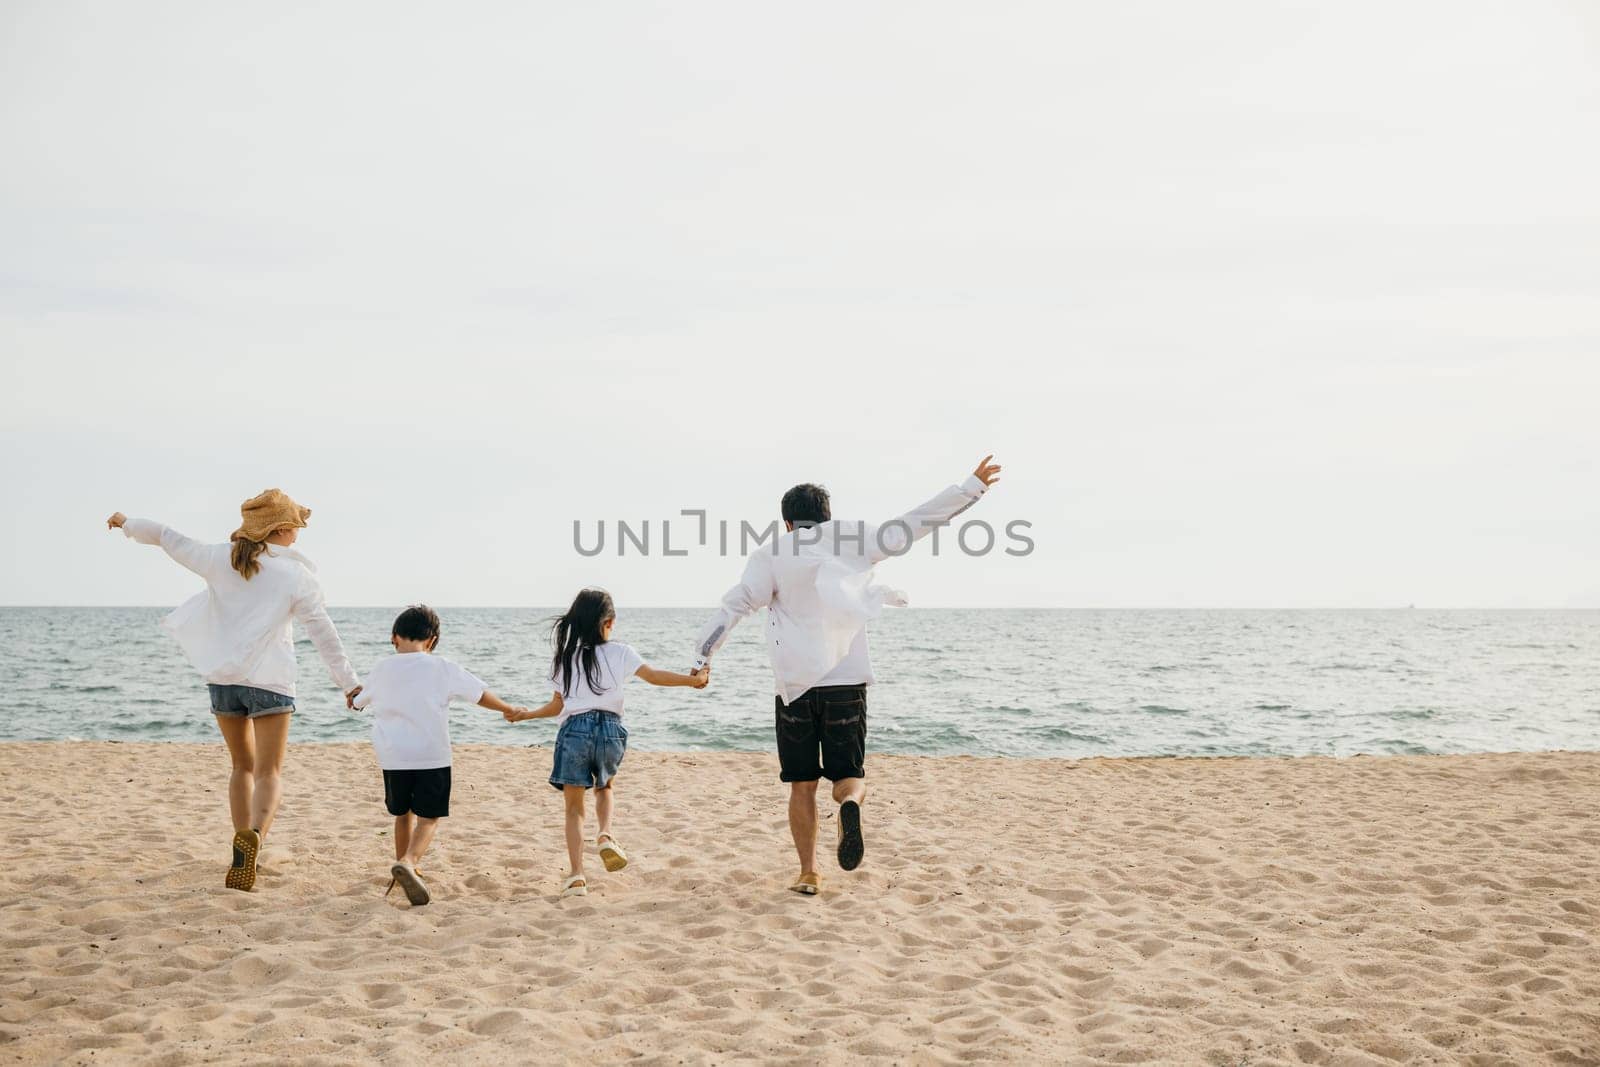 Beachside joy as parents hold hands run and jump with their children in holiday fun. A portrait of family togetherness and carefree enjoyment during a memorable beach vacation. tourism day concept by Sorapop